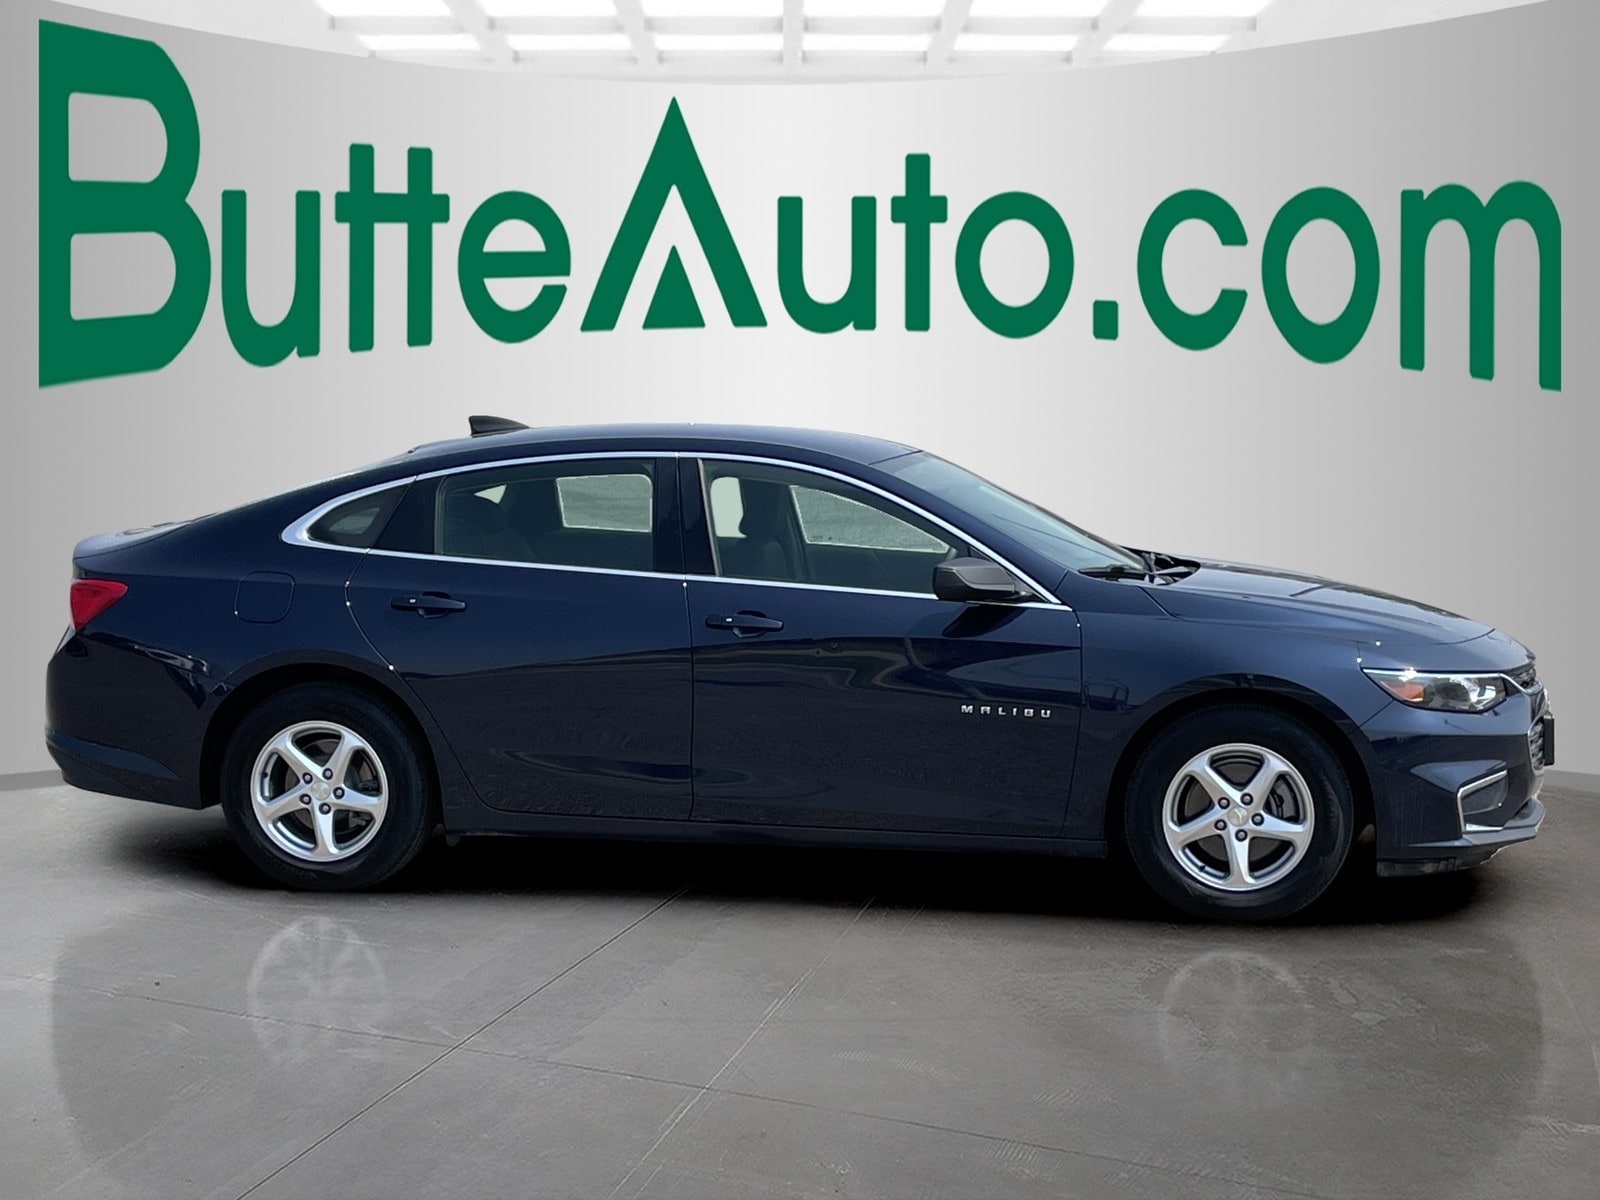 Used 2018 Chevrolet Malibu 1FL with VIN 1G1ZC5ST8JF212767 for sale in Butte, MT